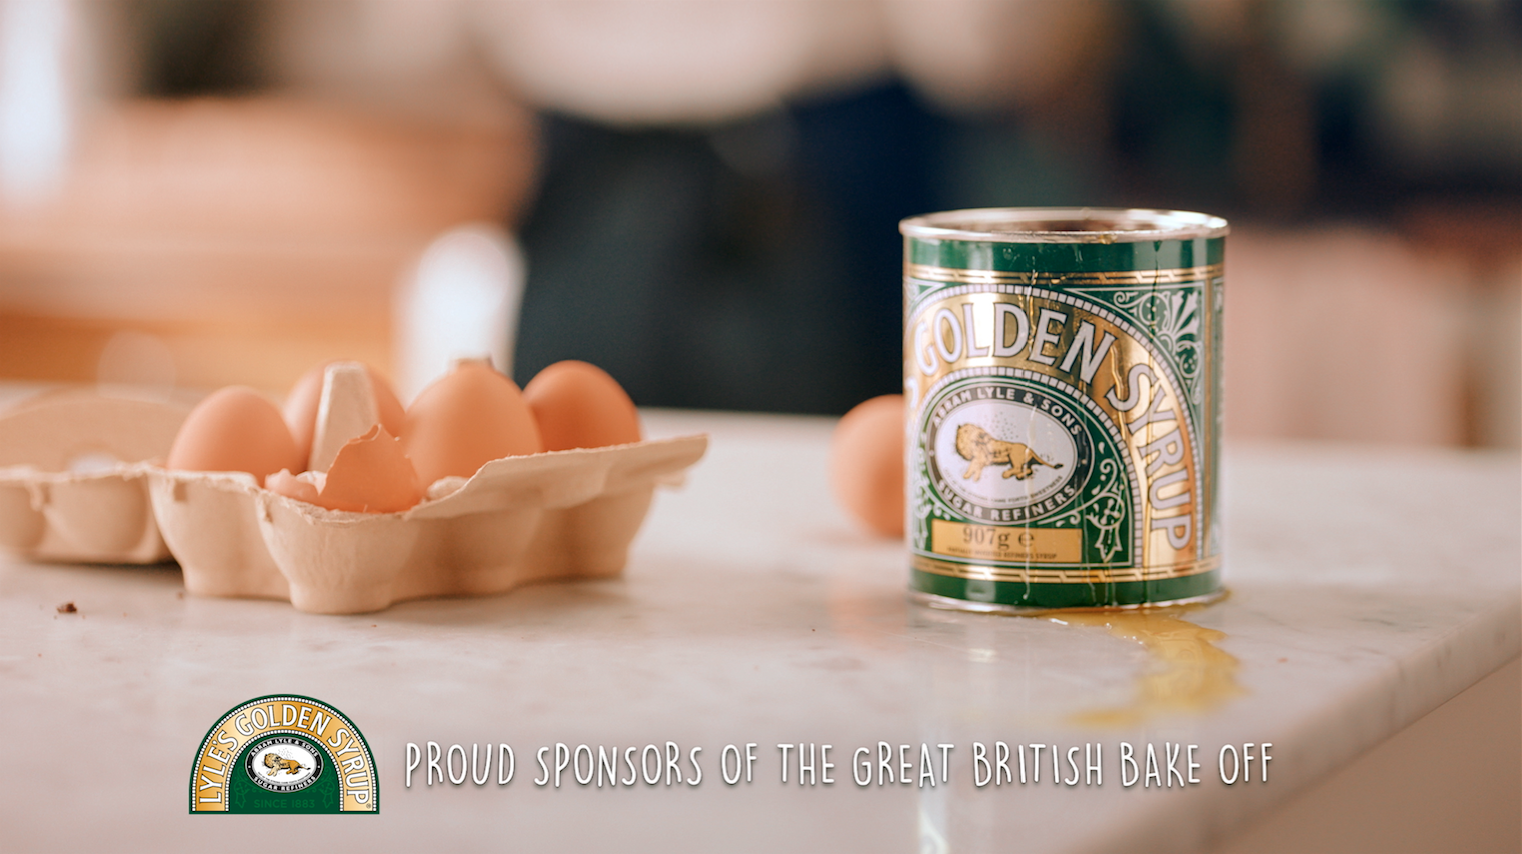 Lyle’s Golden Syrup Releases Brand New British Bake Off Sponsorship Idents